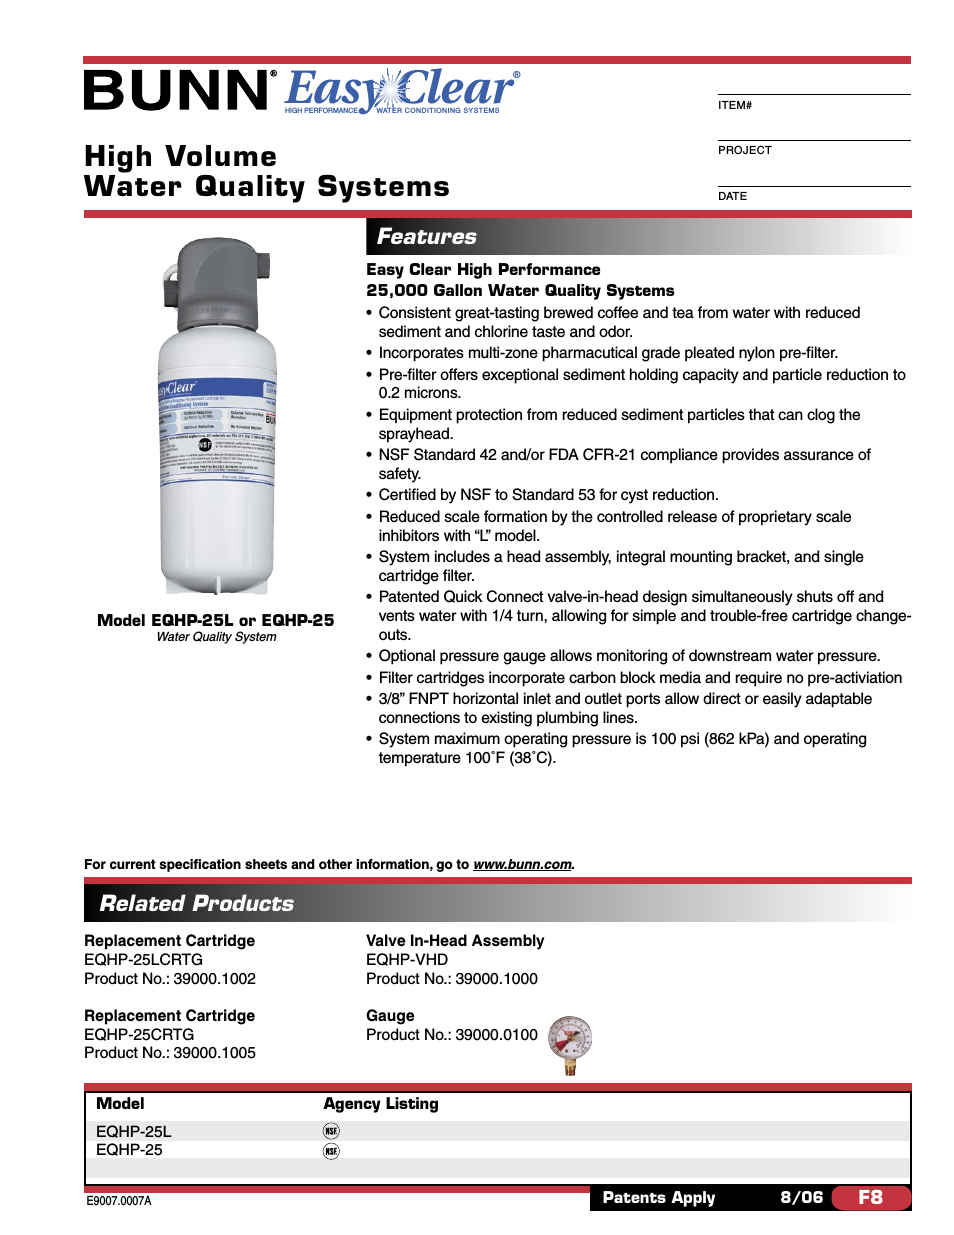 WATER QUALITY SYSTEM EQHP-25L